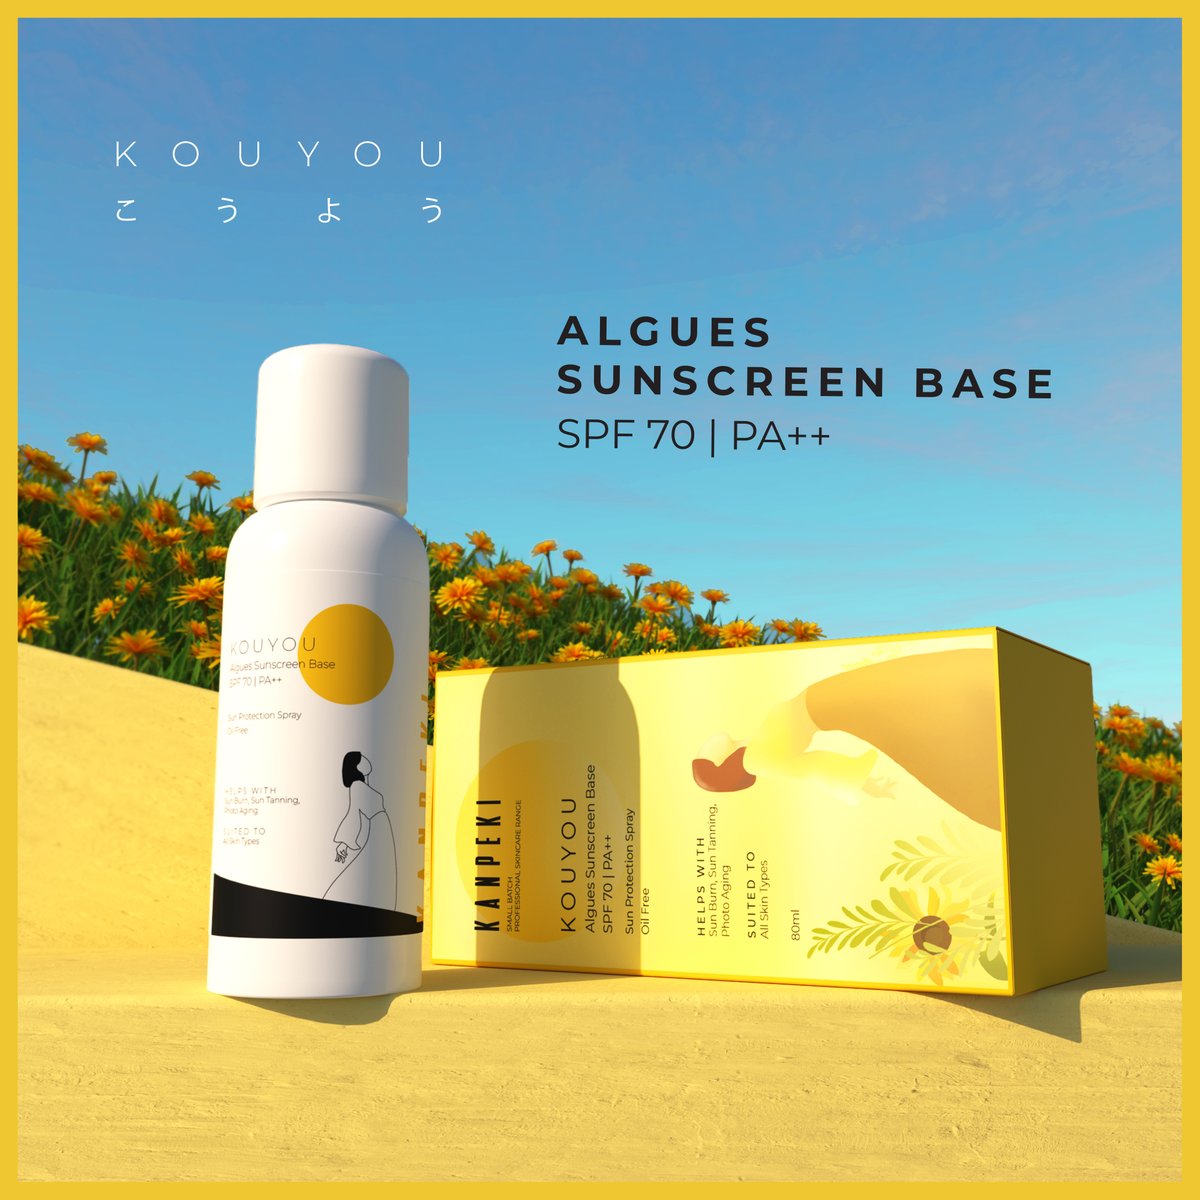 Introducing the All-New Kouyou Algues Sunscreen Base, so you Shine With The Sun. 

Oil Free | Sun Protection Spray

Reduces
-Sun Burn
-Tanning
-Photoaging
.
Buy Now- kanpekiskin.com/products/kouyo…
.
#kanpeki #kouyou #skincare #summerskincare #sunscreen #newproducts #SPF70 #OilFree